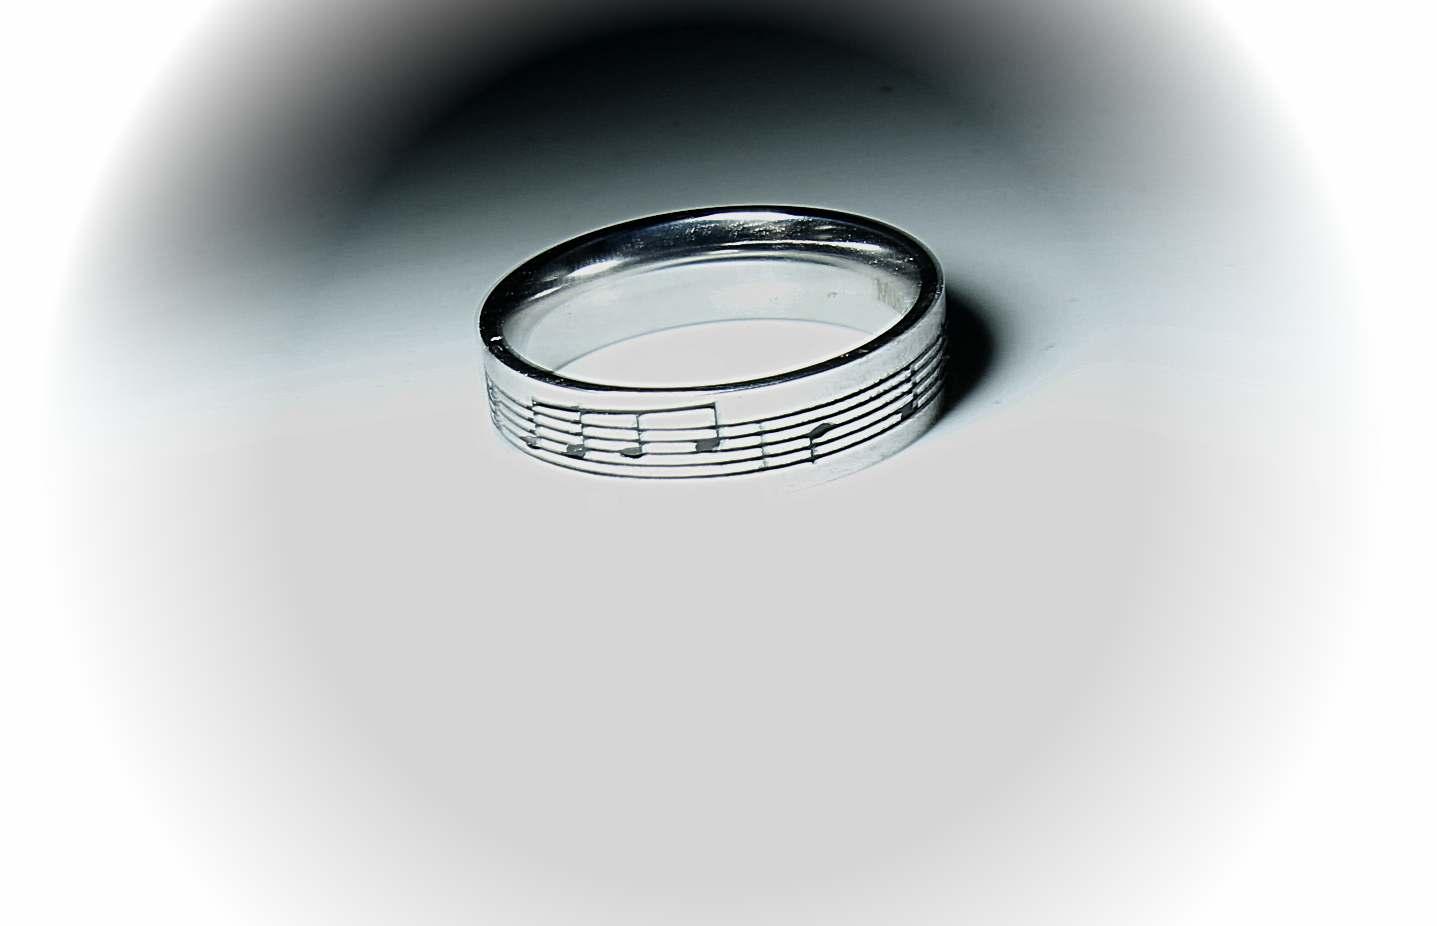 Music Note Ring Stainless Steel - Black Etched Music Notes